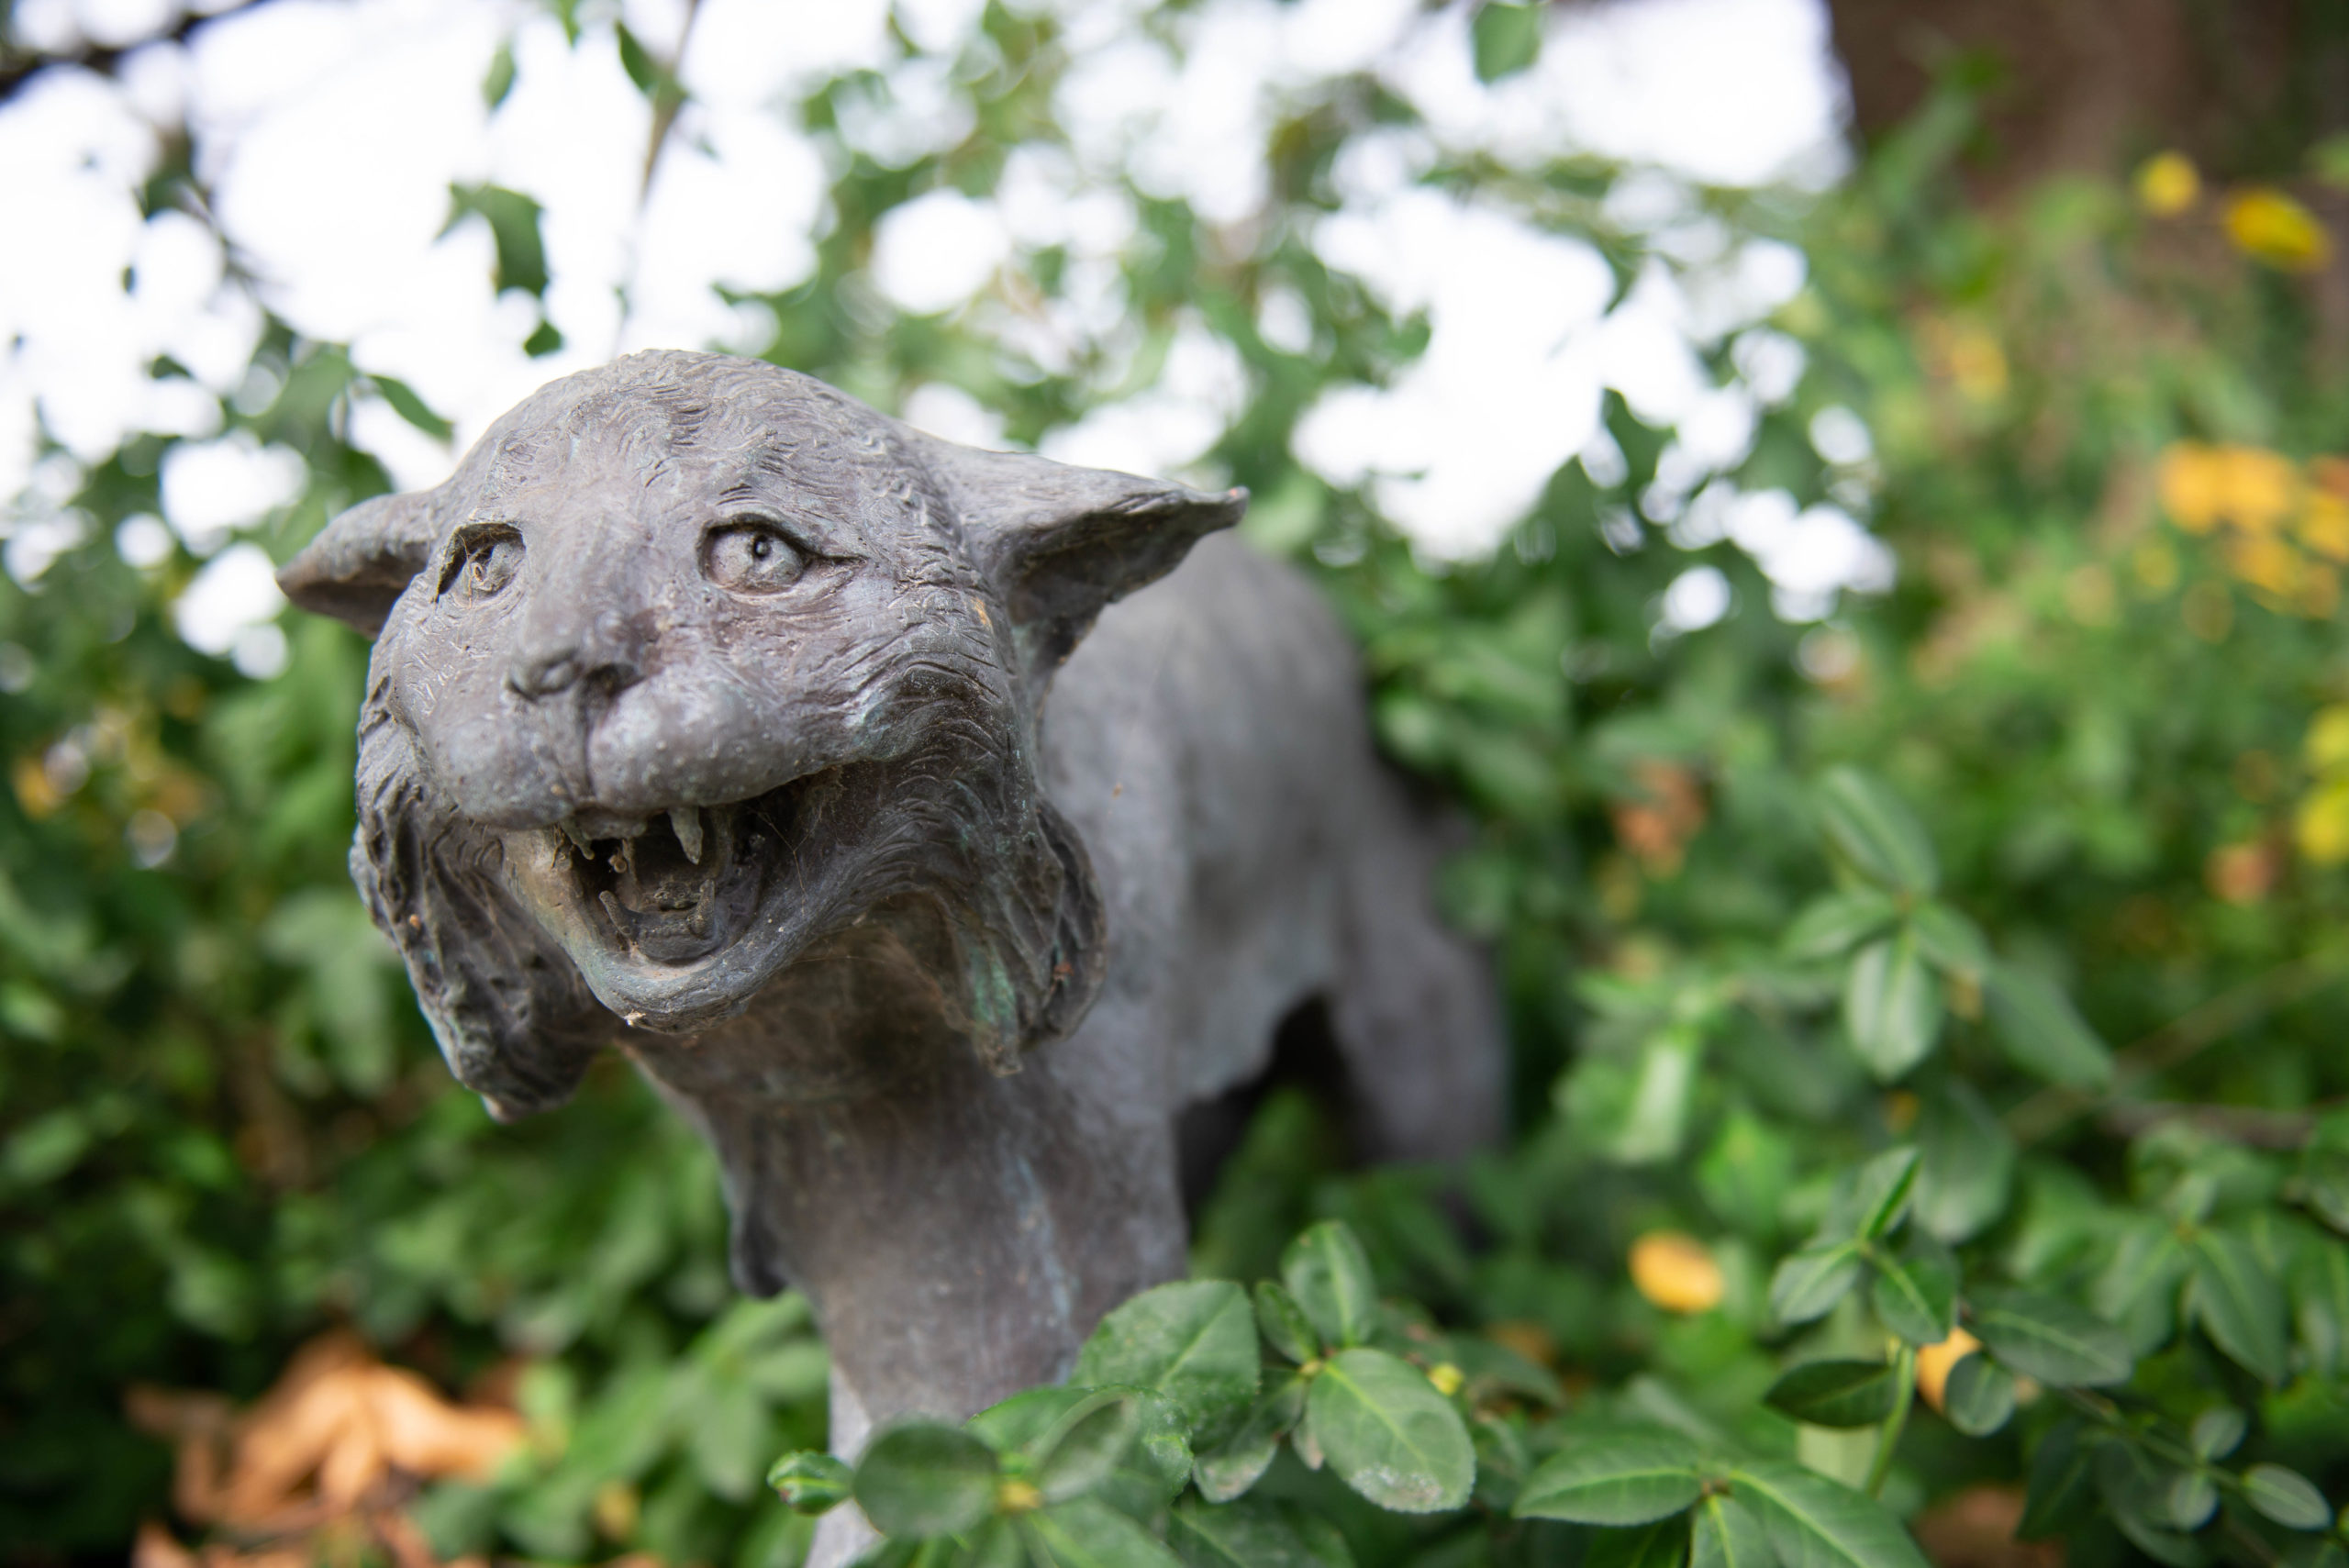 This is the Prowler, a bobcat sculpture located between TJ Majors and the Student Center.